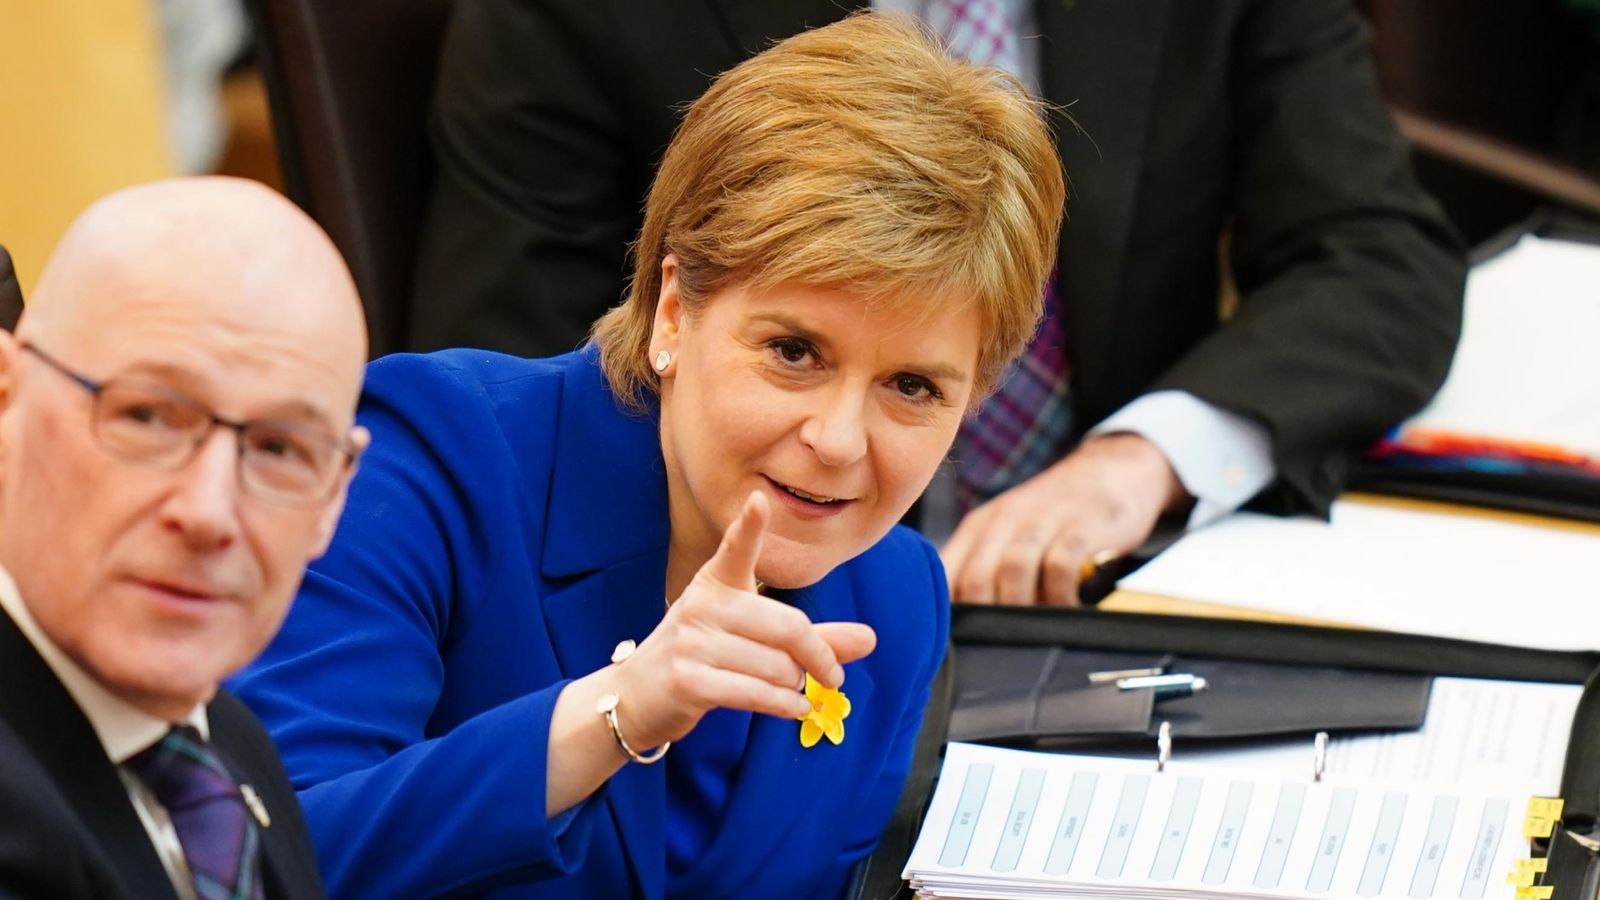 Nicola Sturgeon 'confident' her successor will lead Scotland to become an independent country